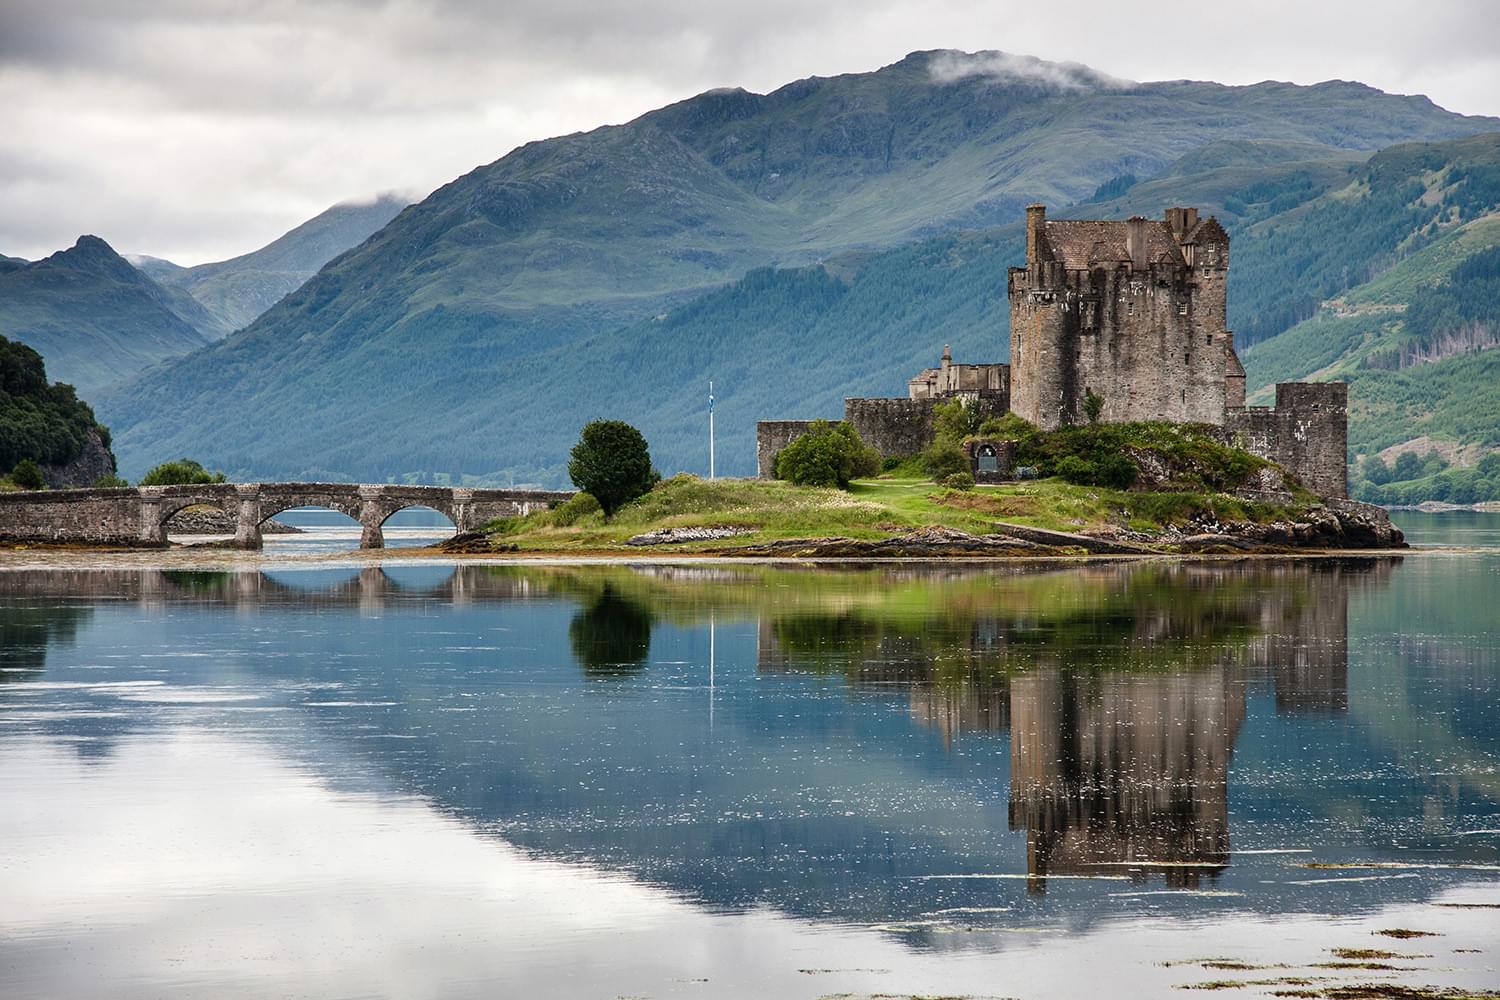 A view of a Scottish castle surrounded by water. There is a bridge that leads to the castle. There are also large hills in the background and some fog has set in at the tops of the hills.